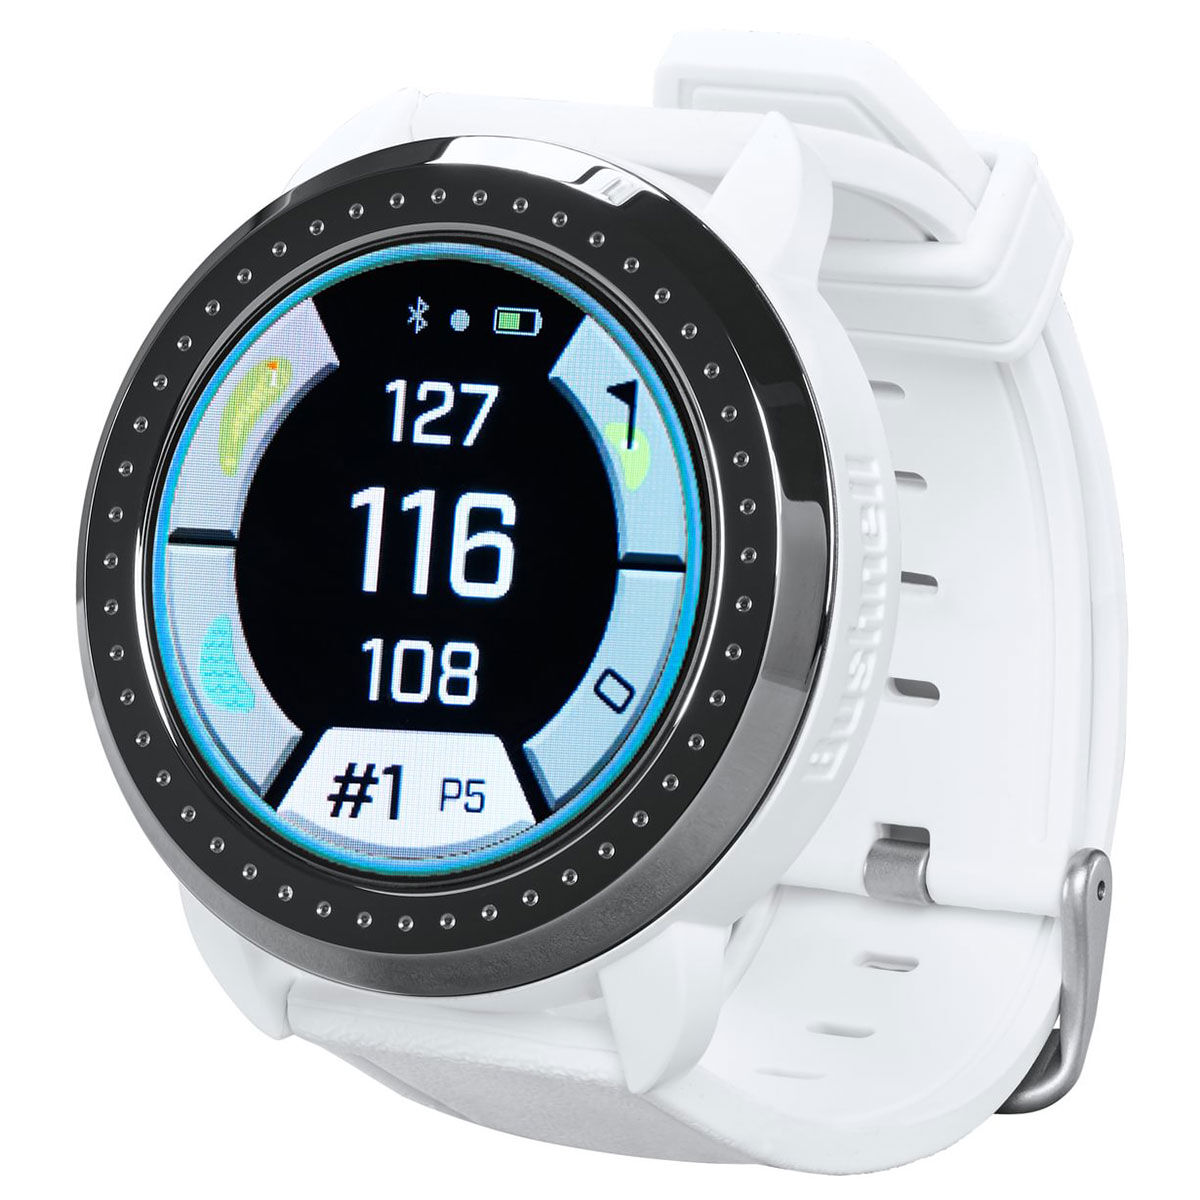 Bushnell Golf GPS Watch, White Comfortable ION Elite | American Golf, one size